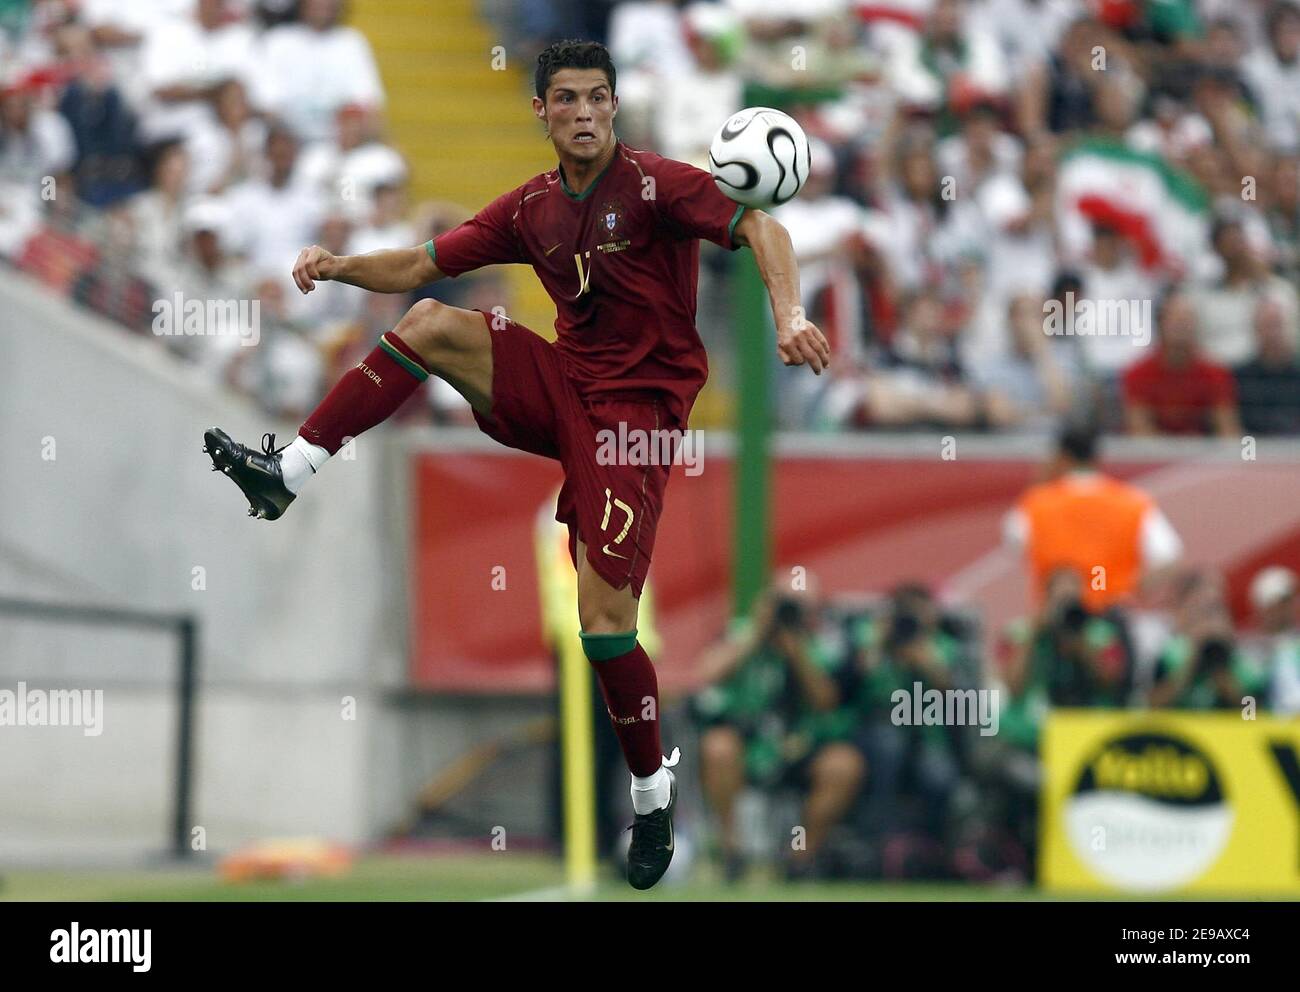 Portugal's Cristiano Ronaldo in action during the World Cup 2006, Portugal vs Iran at the Fifa World Cup Stadium in Frankfurt, Germany on June 17, 2006. Portugal won 2-0. Photo by Christian Liewig/ABACAPRESS.COM Stock Photo